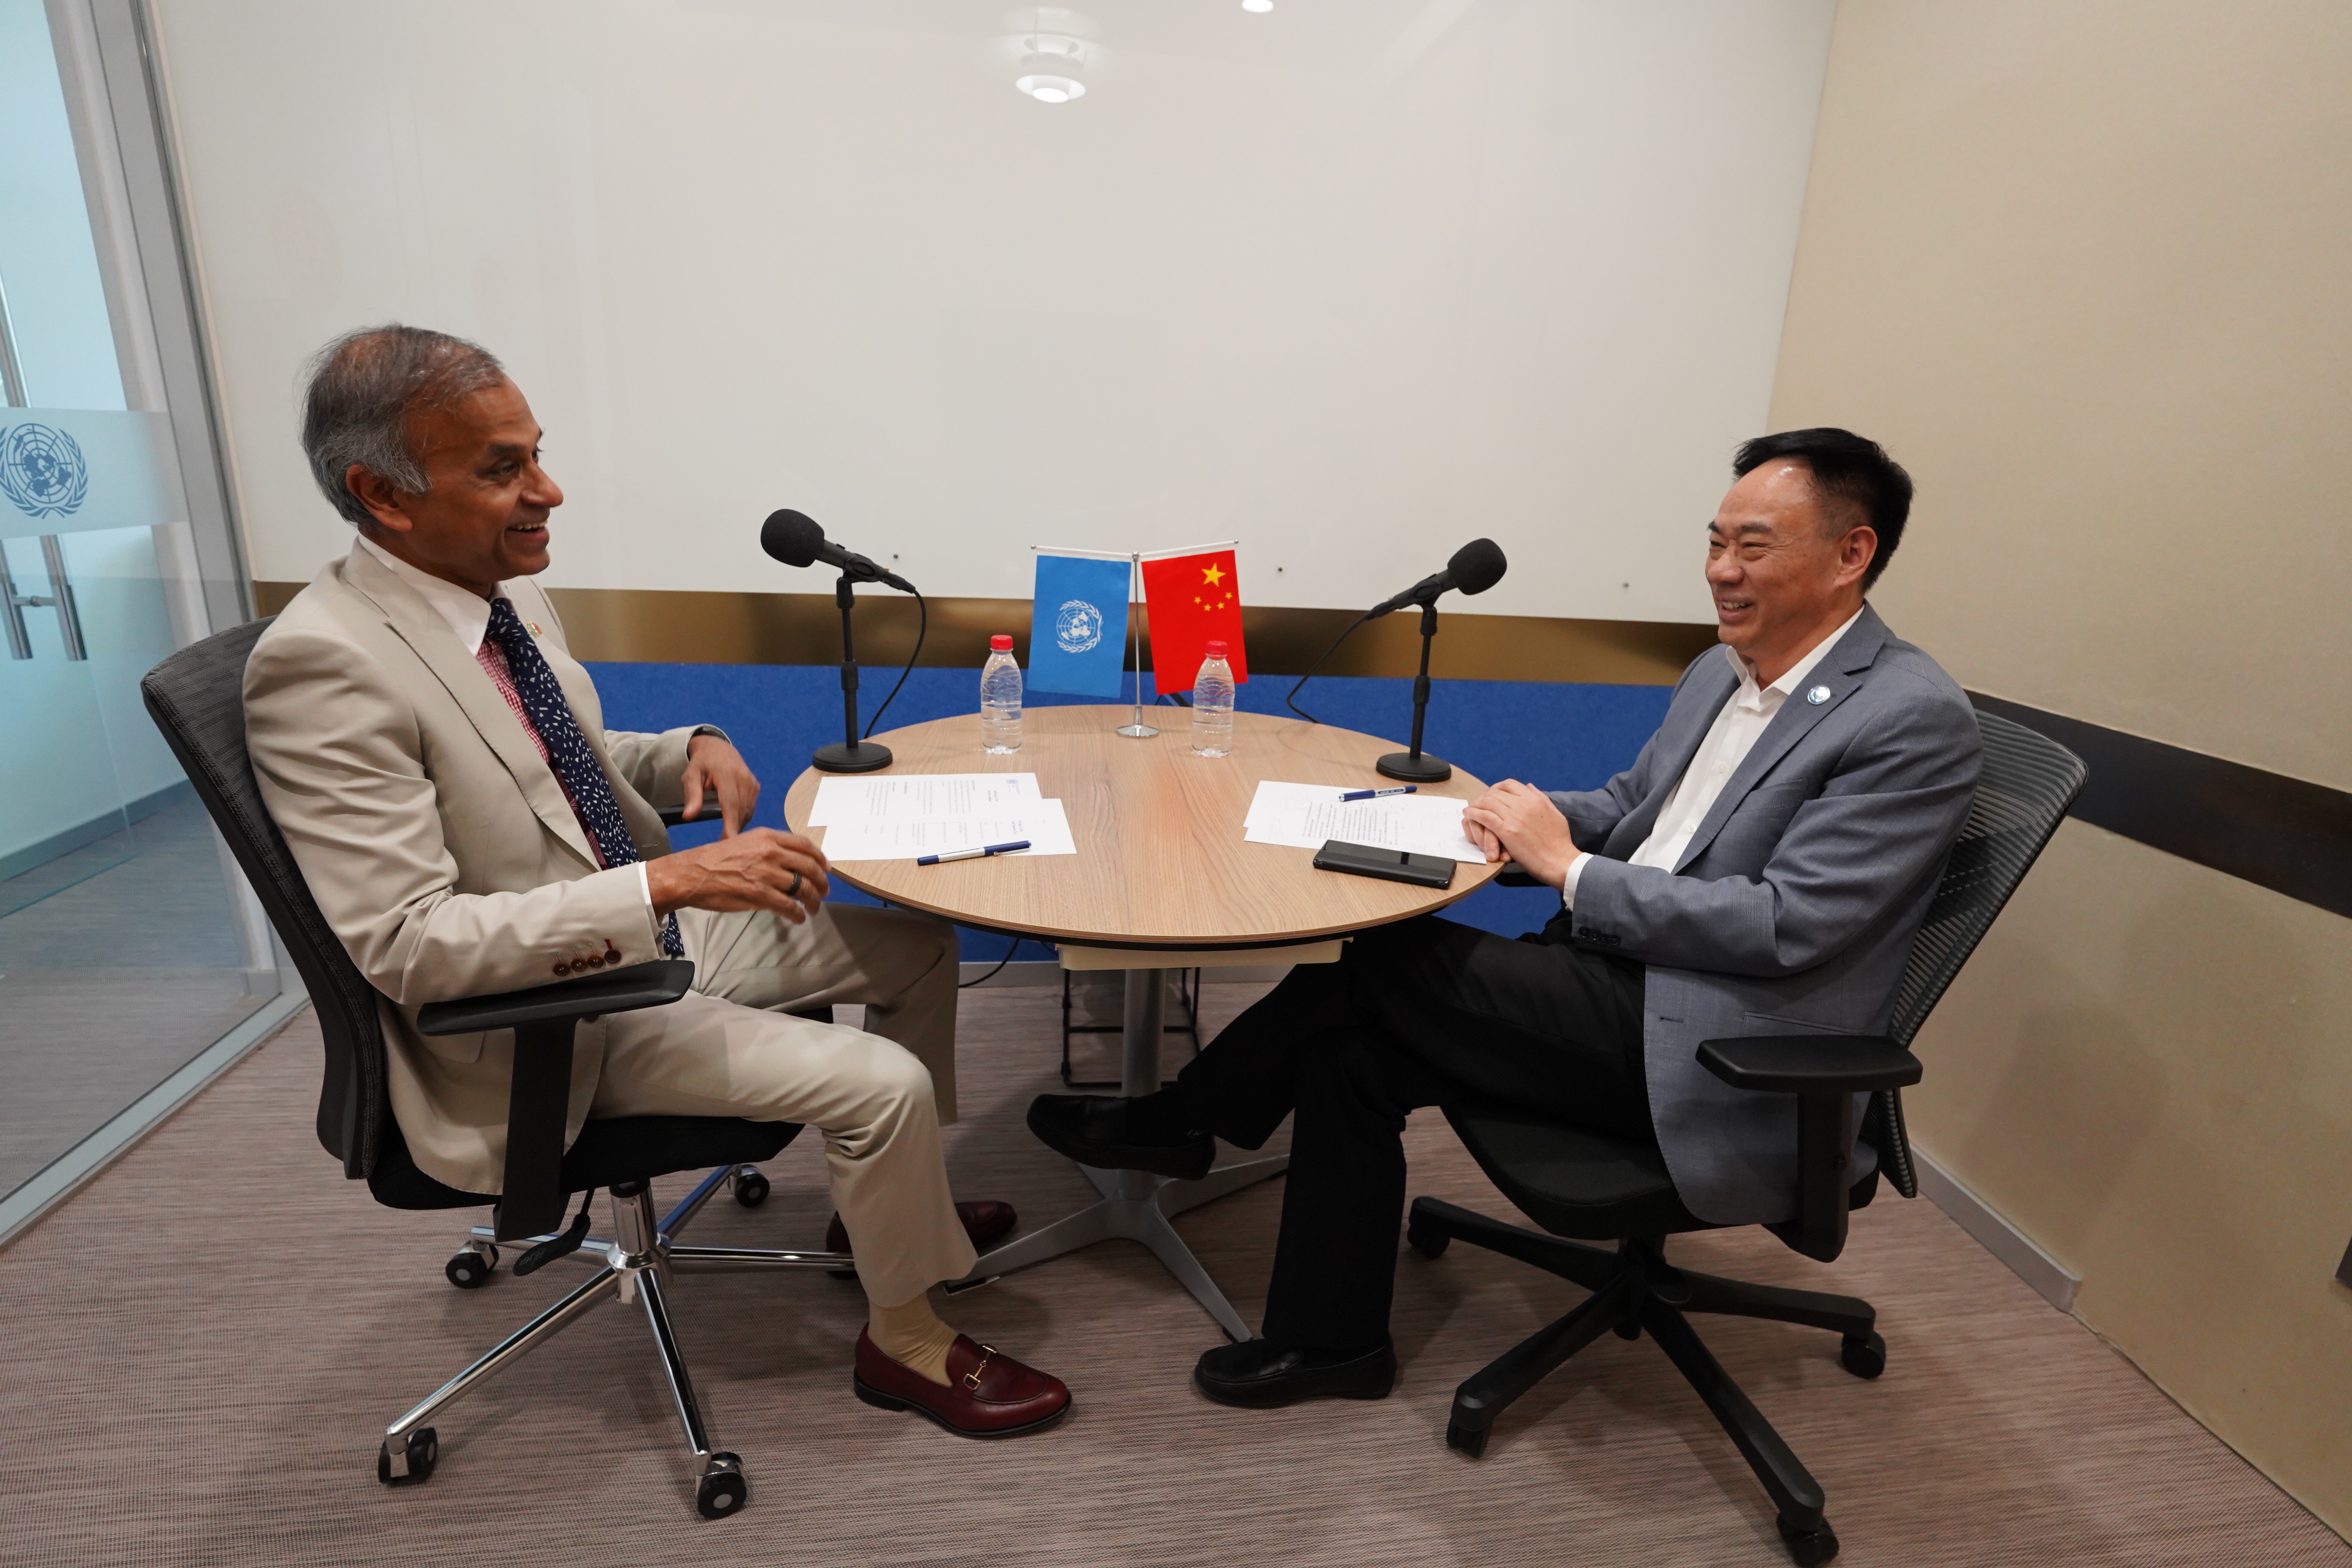 UN Resident Coordinator in China Siddharth Chatterjee sits down with Sixi Qu, Representative and Country Director for the World Food Programme (WFP) in China